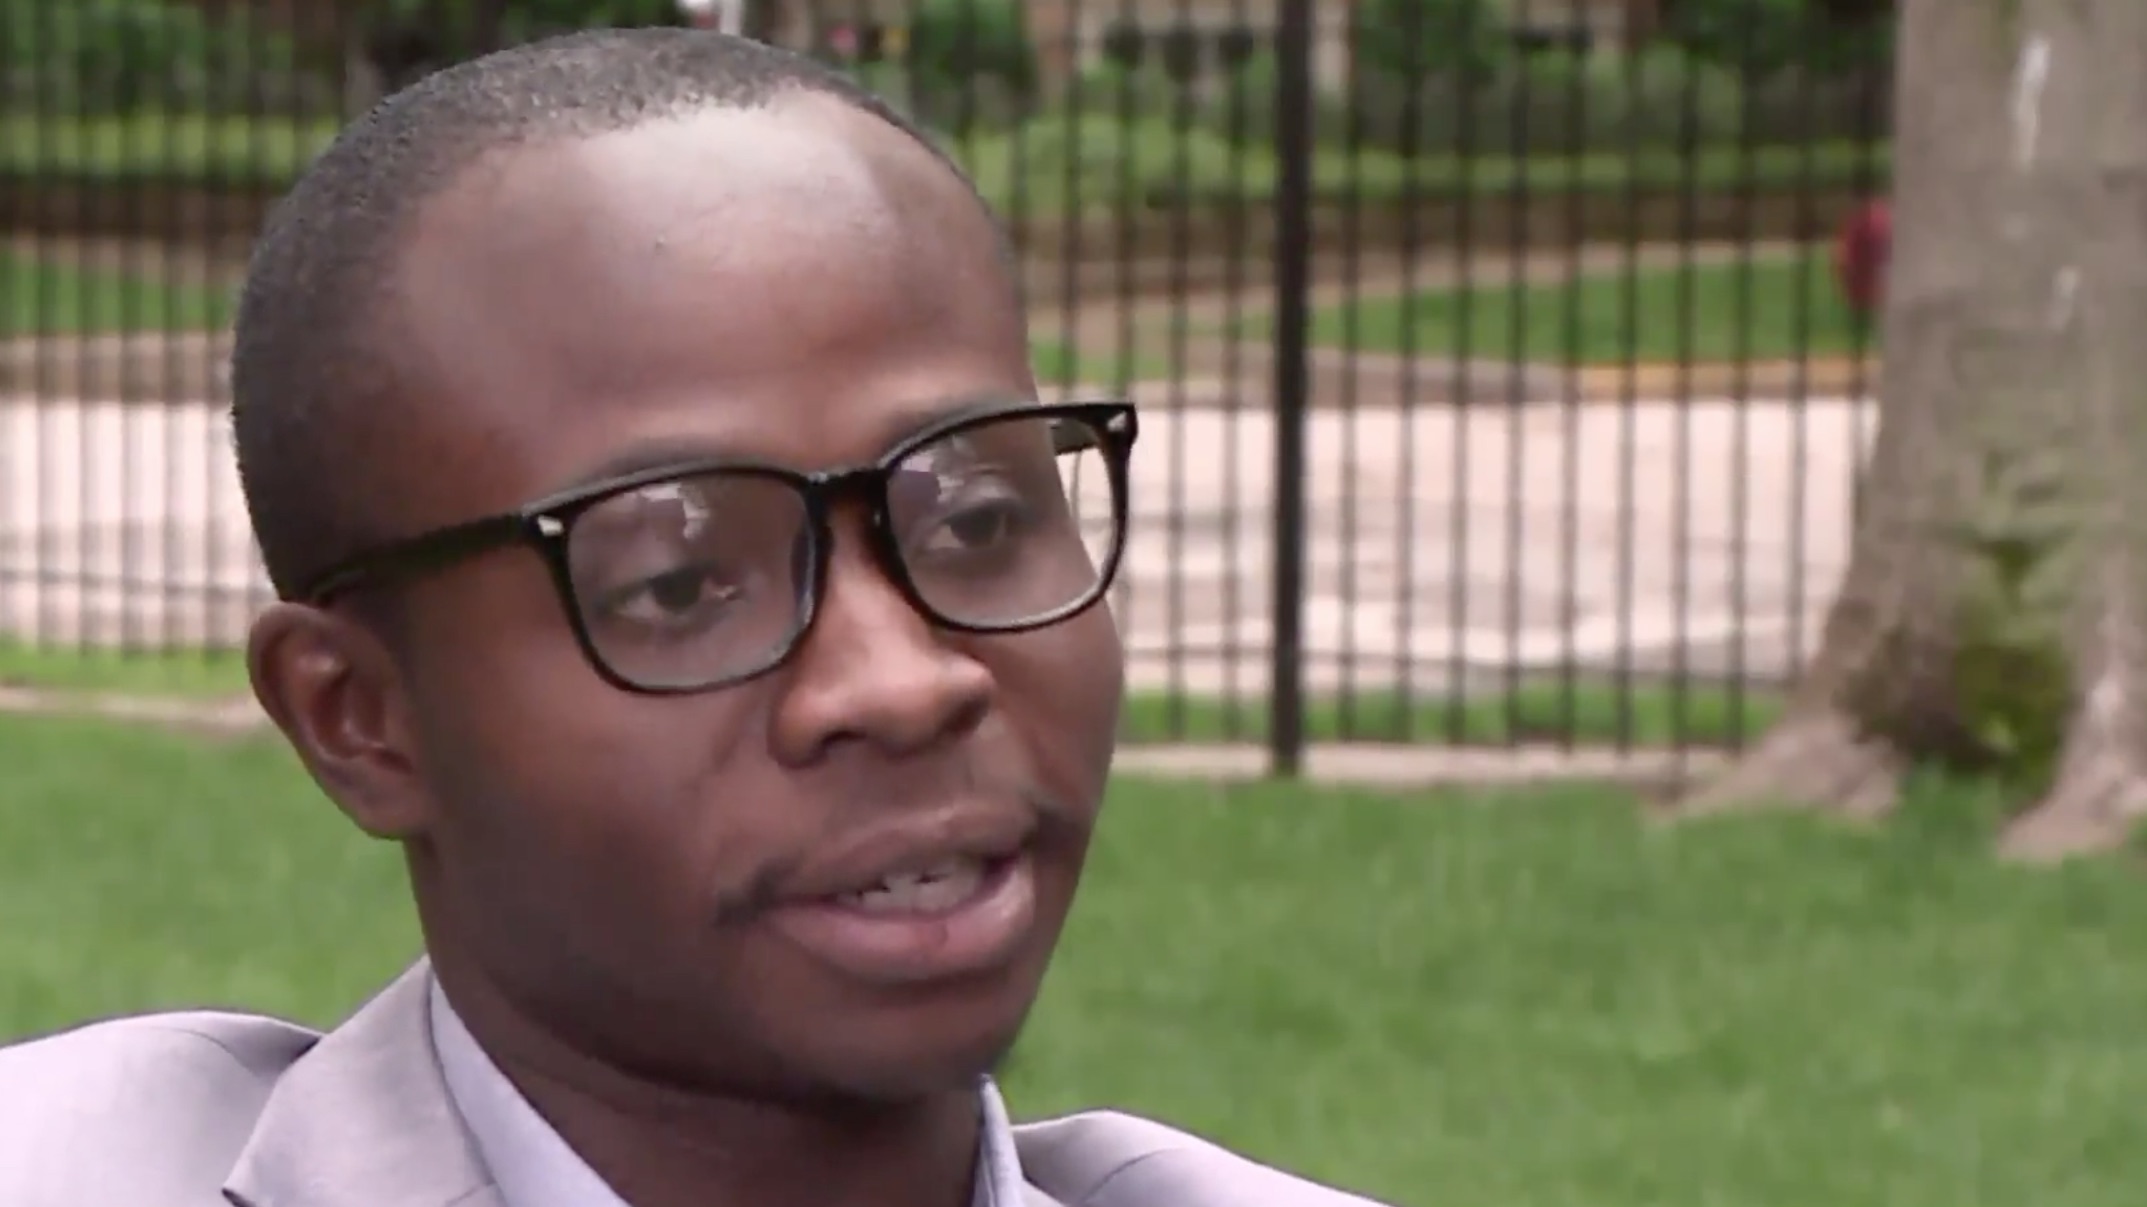 A Former Chicago Gang Member Launched An Accounting Business And Became A Millionaire